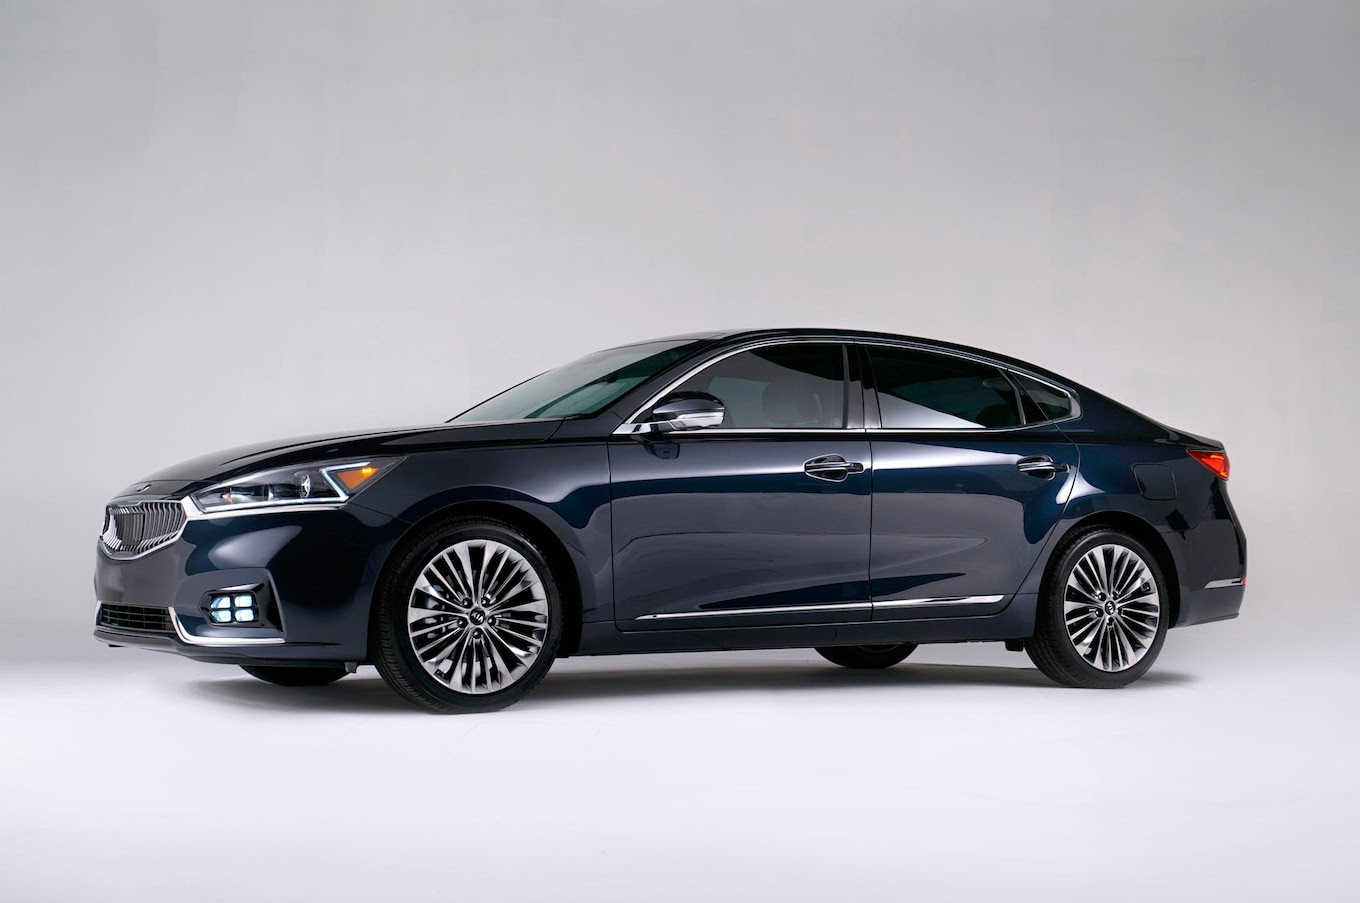 2017 Kia Cadenza First Look Review - Motor Trend